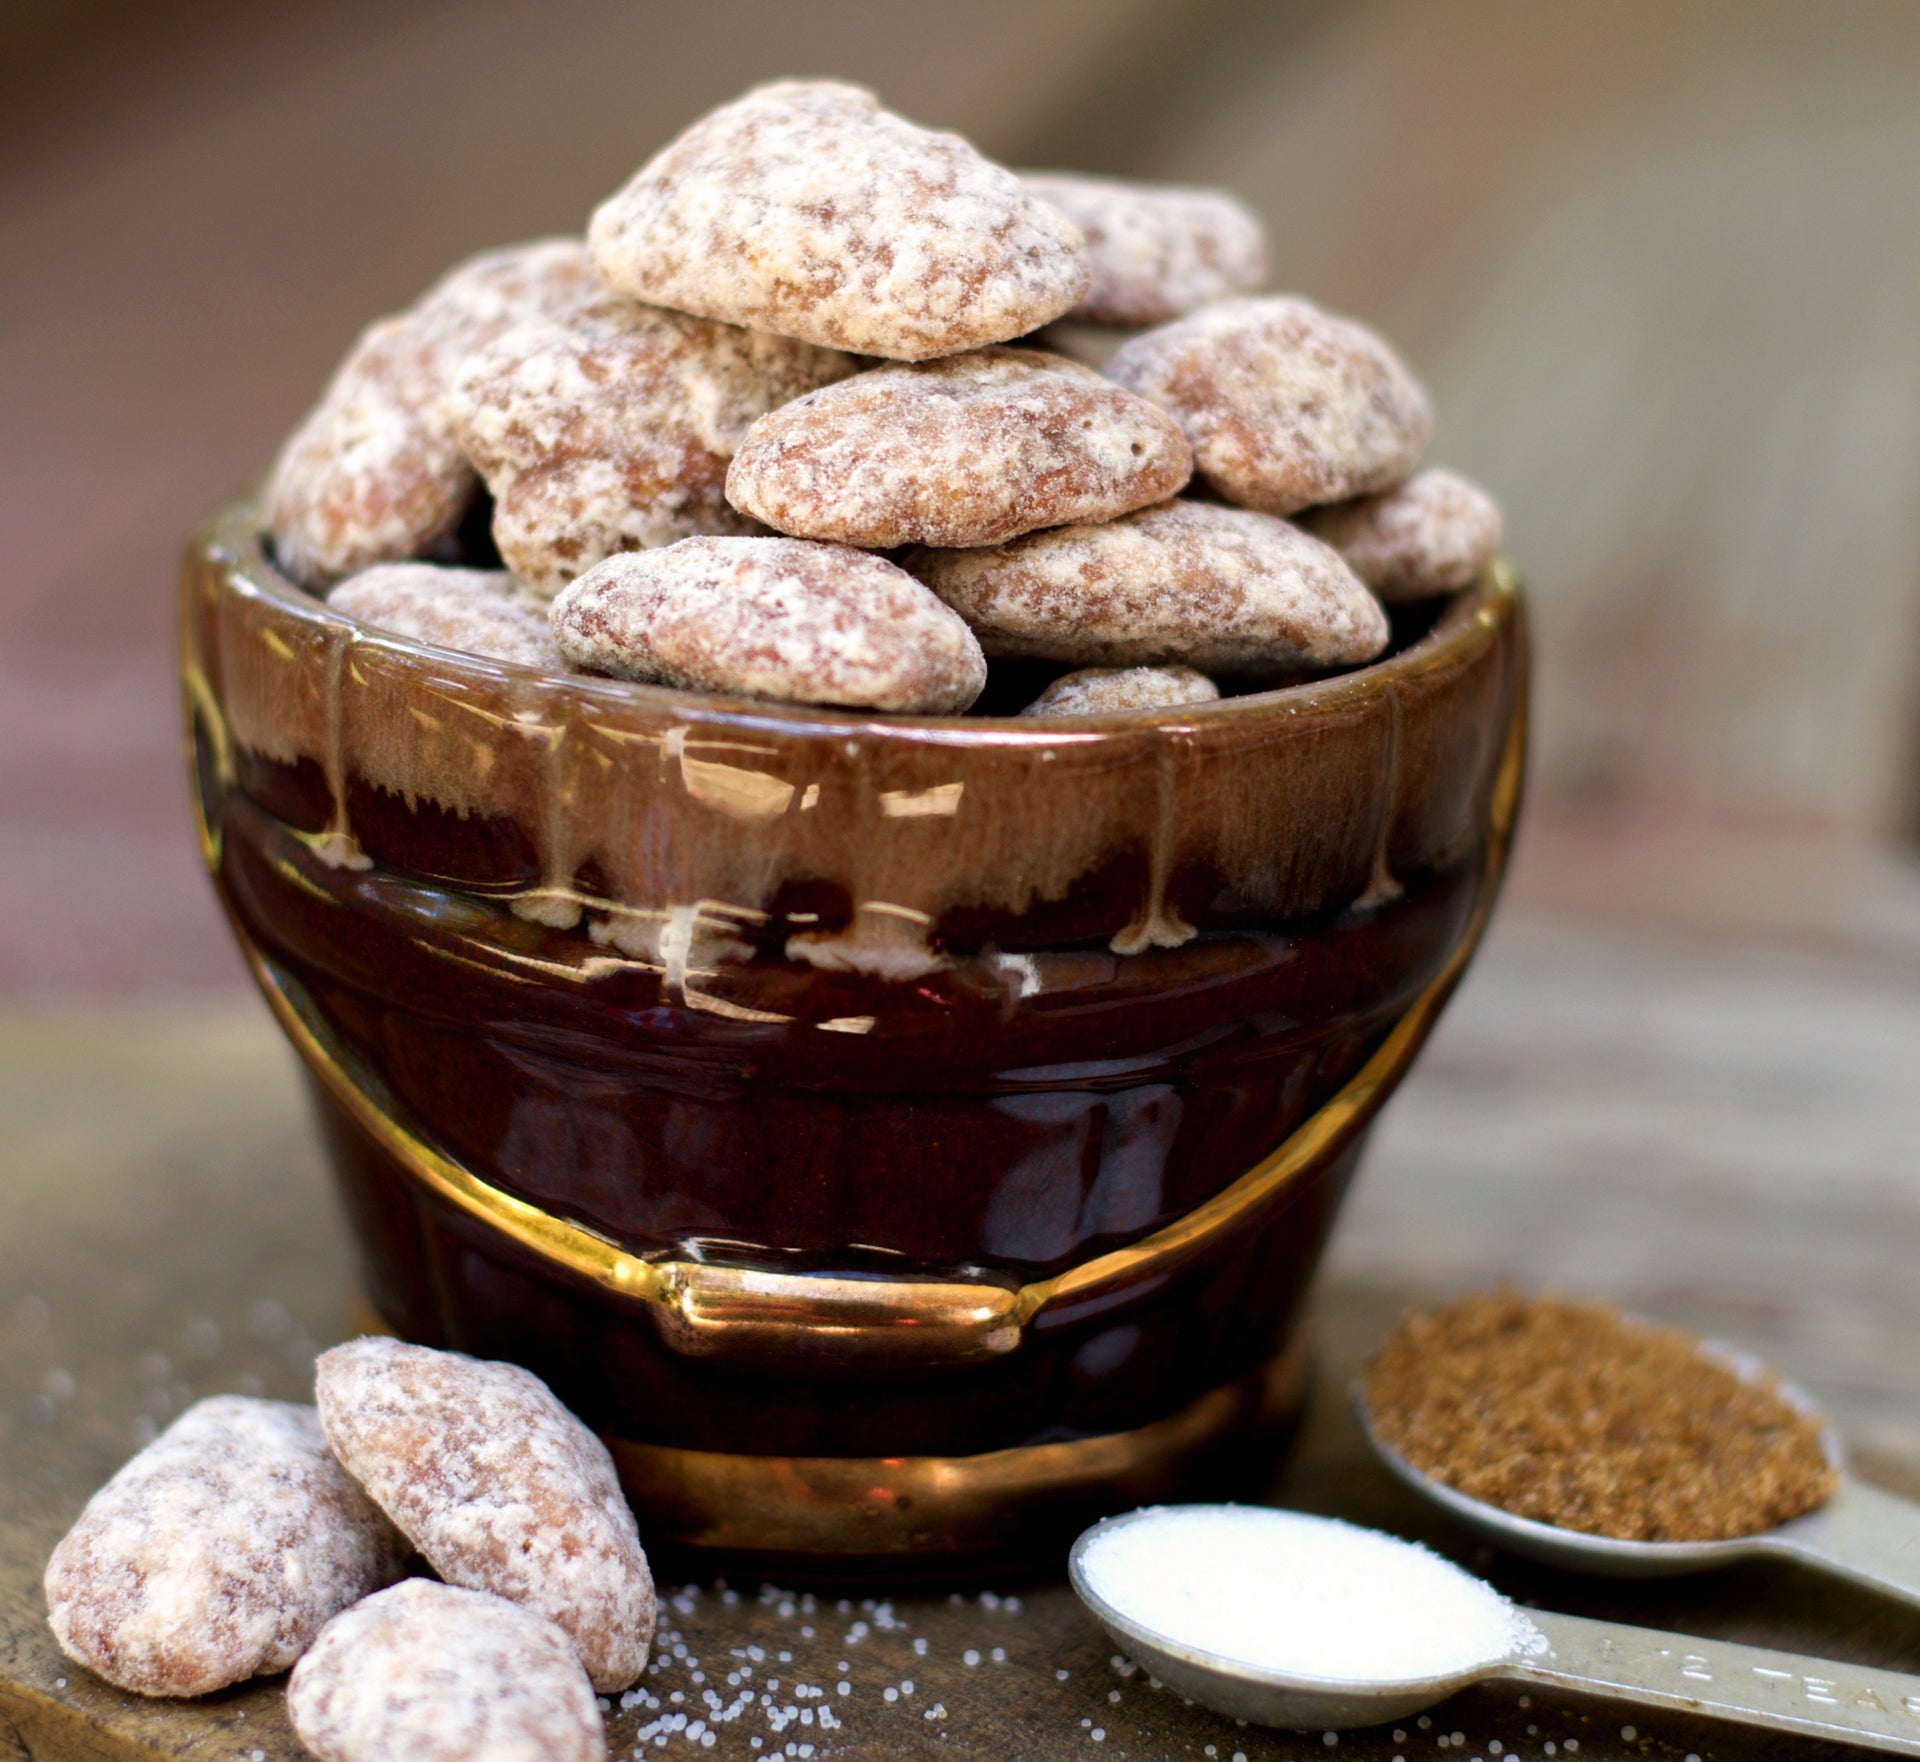 Our Southern Praline Pecans are glazed to perfection. Available in 1 pound bags or 12 ounce gift tins. Enjoy these yourself or send out as a gift! 